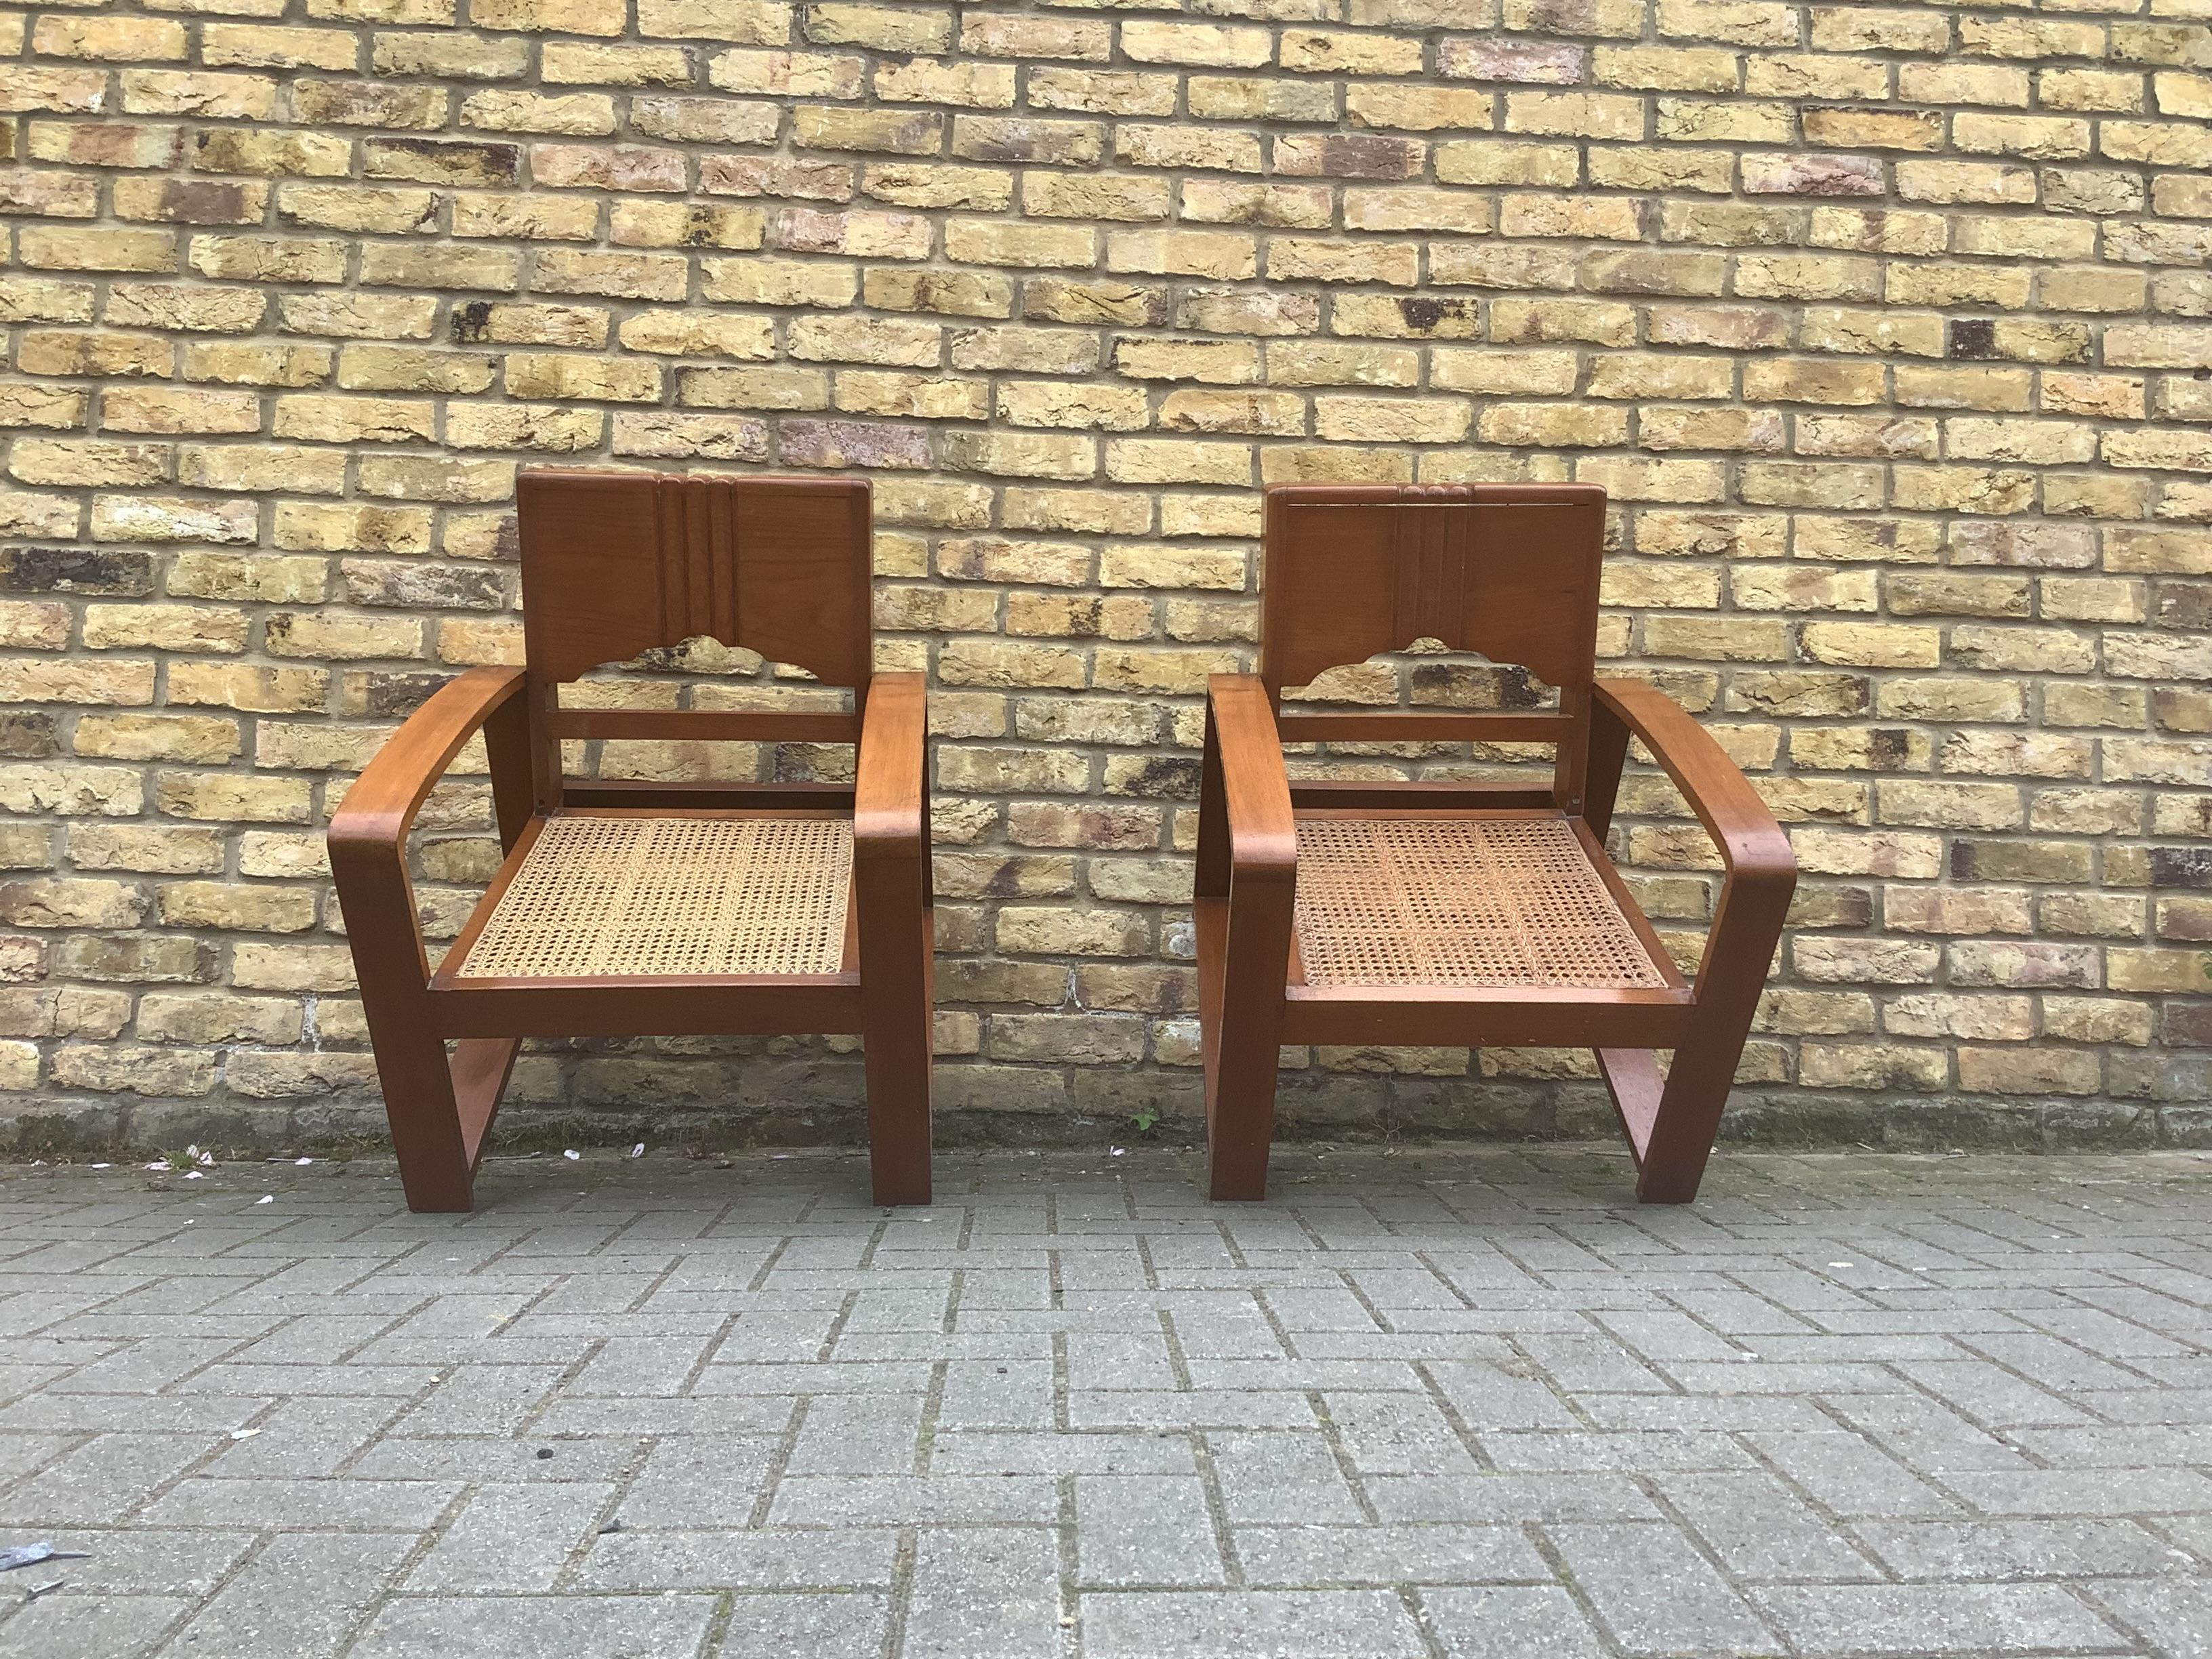 A Pair of Anglo -Burmese teak wood chairs,with cane seating curved deco styling
In good vintage condition wonderful rare pieces 
circa 1930.